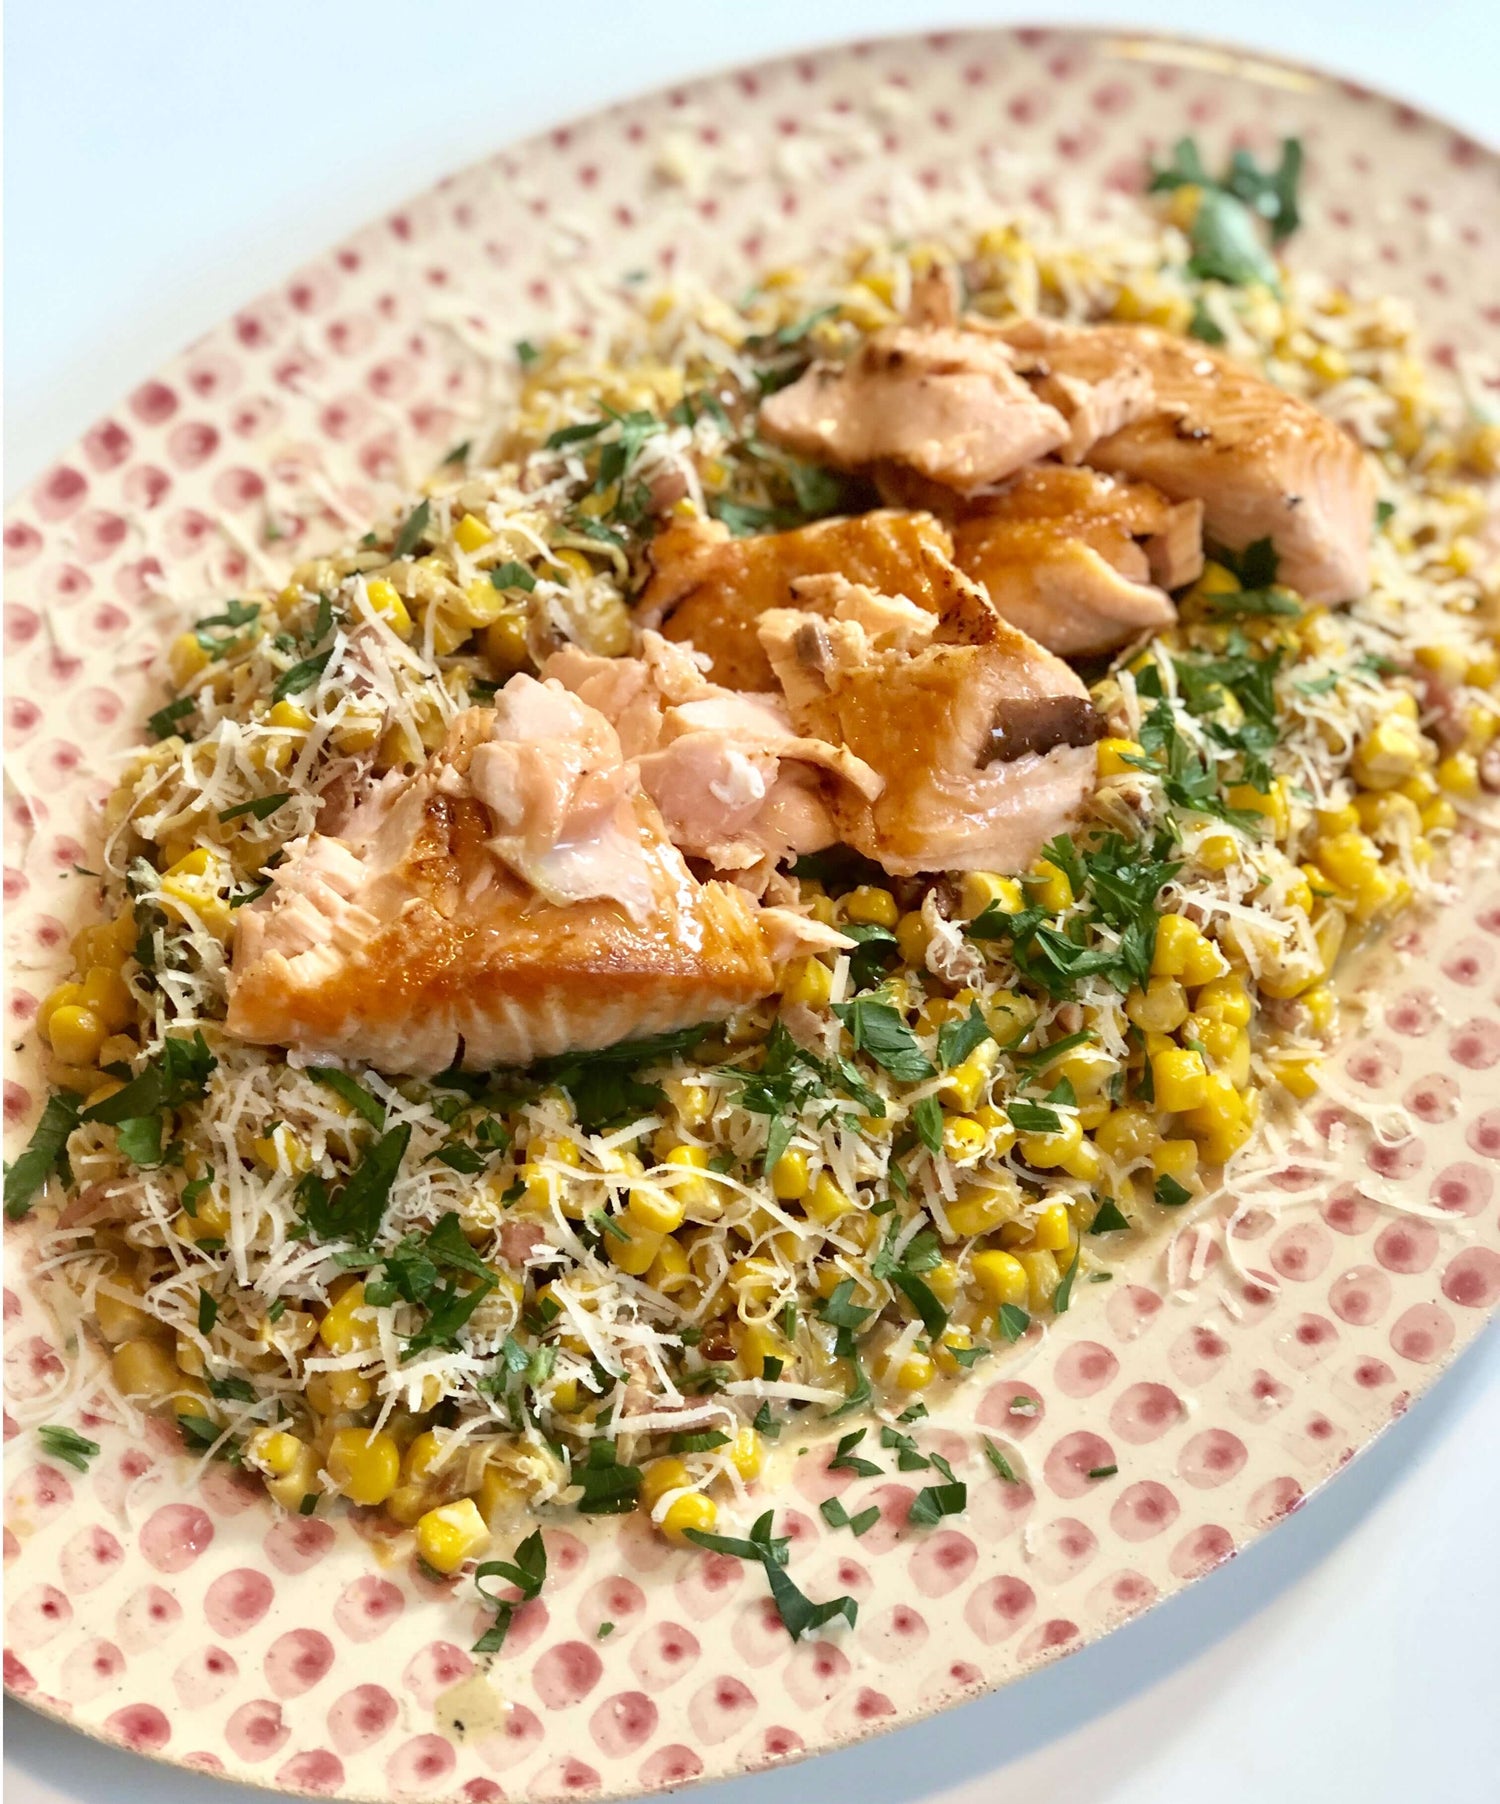 Creamy corn with coconut milk and salty roasted salmon